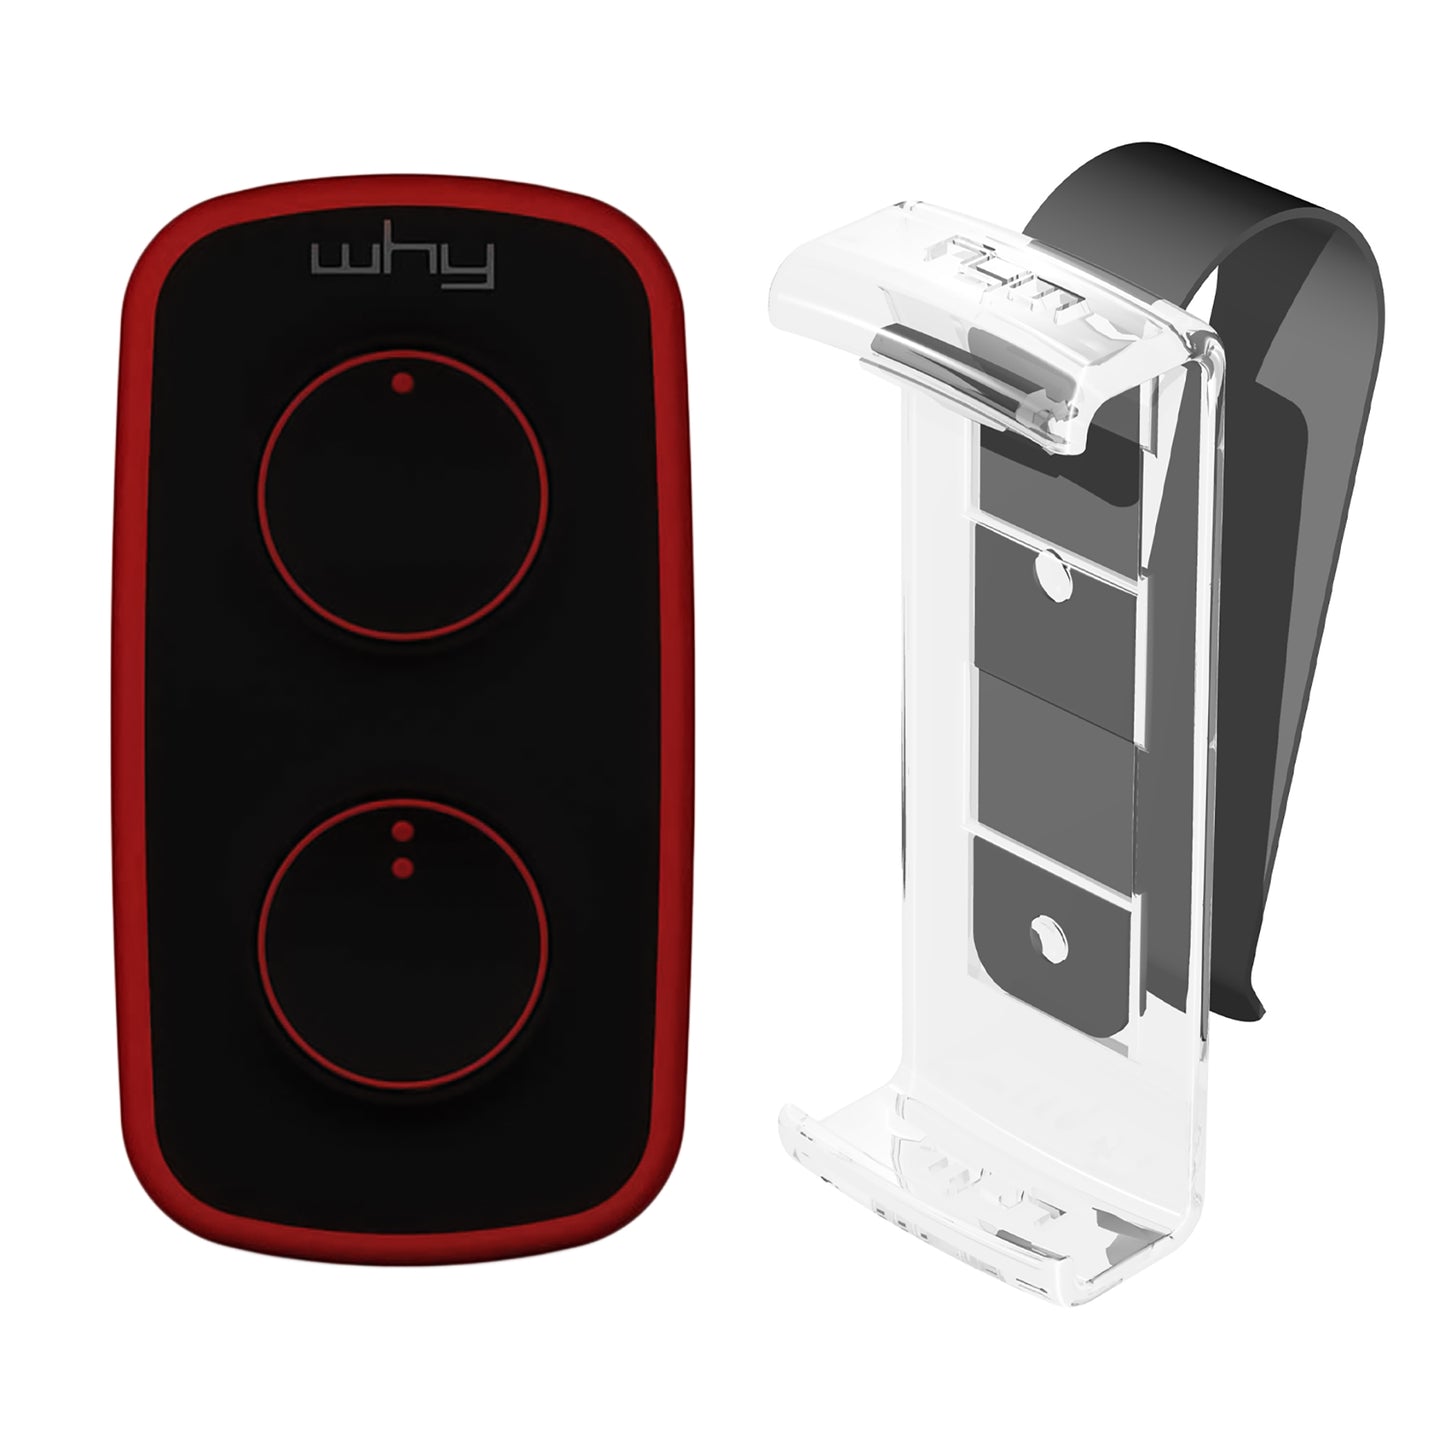 WHY EVO MINI Multi-frequency rolling code remote control from 280 to 868 MHz with Visor Clip, programmable self-learning gate opener, wide-range remote control with 4 buttons, vulcan red